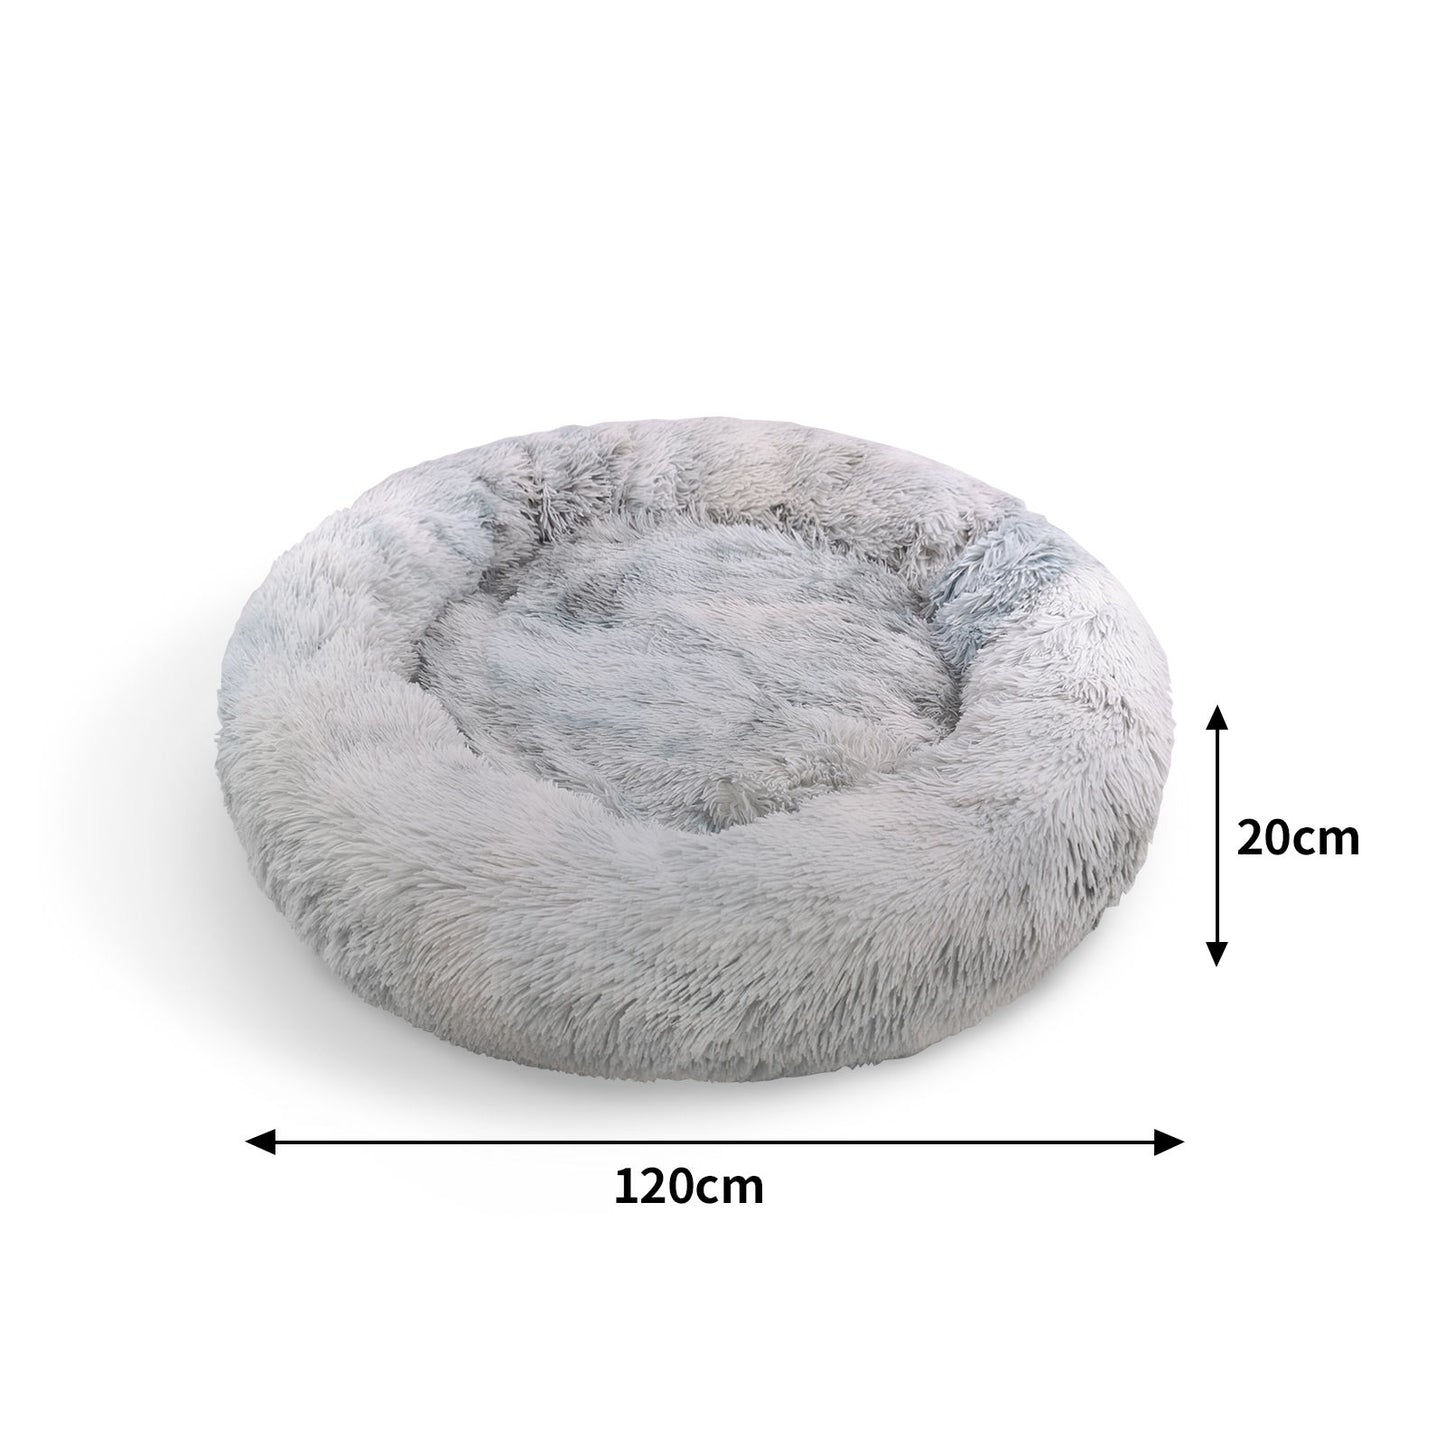 Pawfriends Dog Cat Pet Calming Bed Washable ZIPPER Cover Warm Soft Plush Round Sleeping 120cm